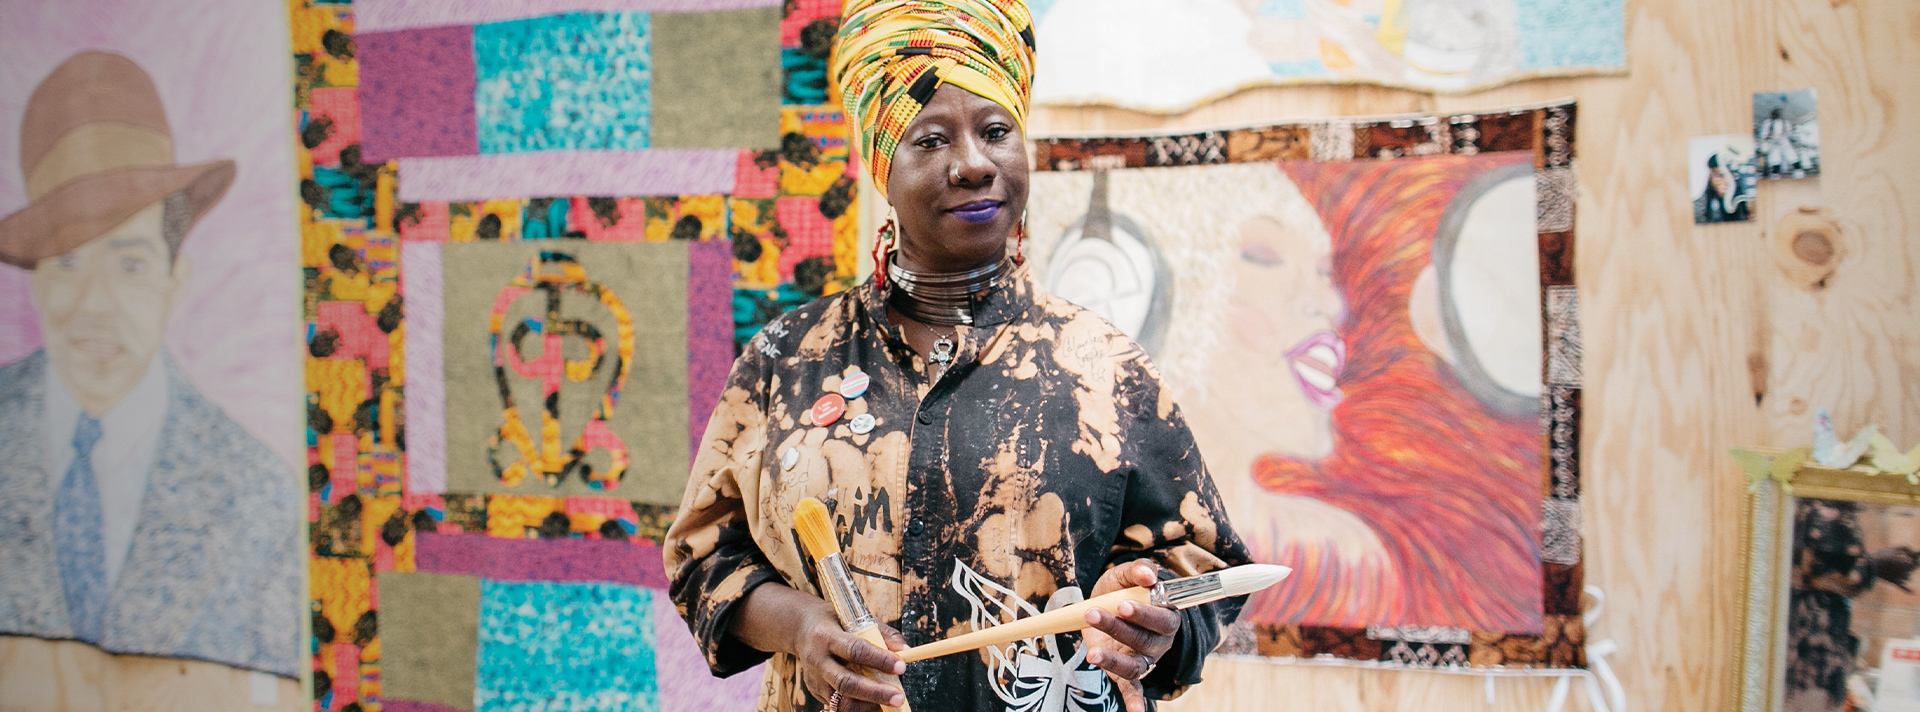 2017 Union Fellow Celeste Butler stands in front of two of her large quilts. She wears a yellow patterned head wrap and artist's smock, holding two paintbrushes. (Union fellowship header)